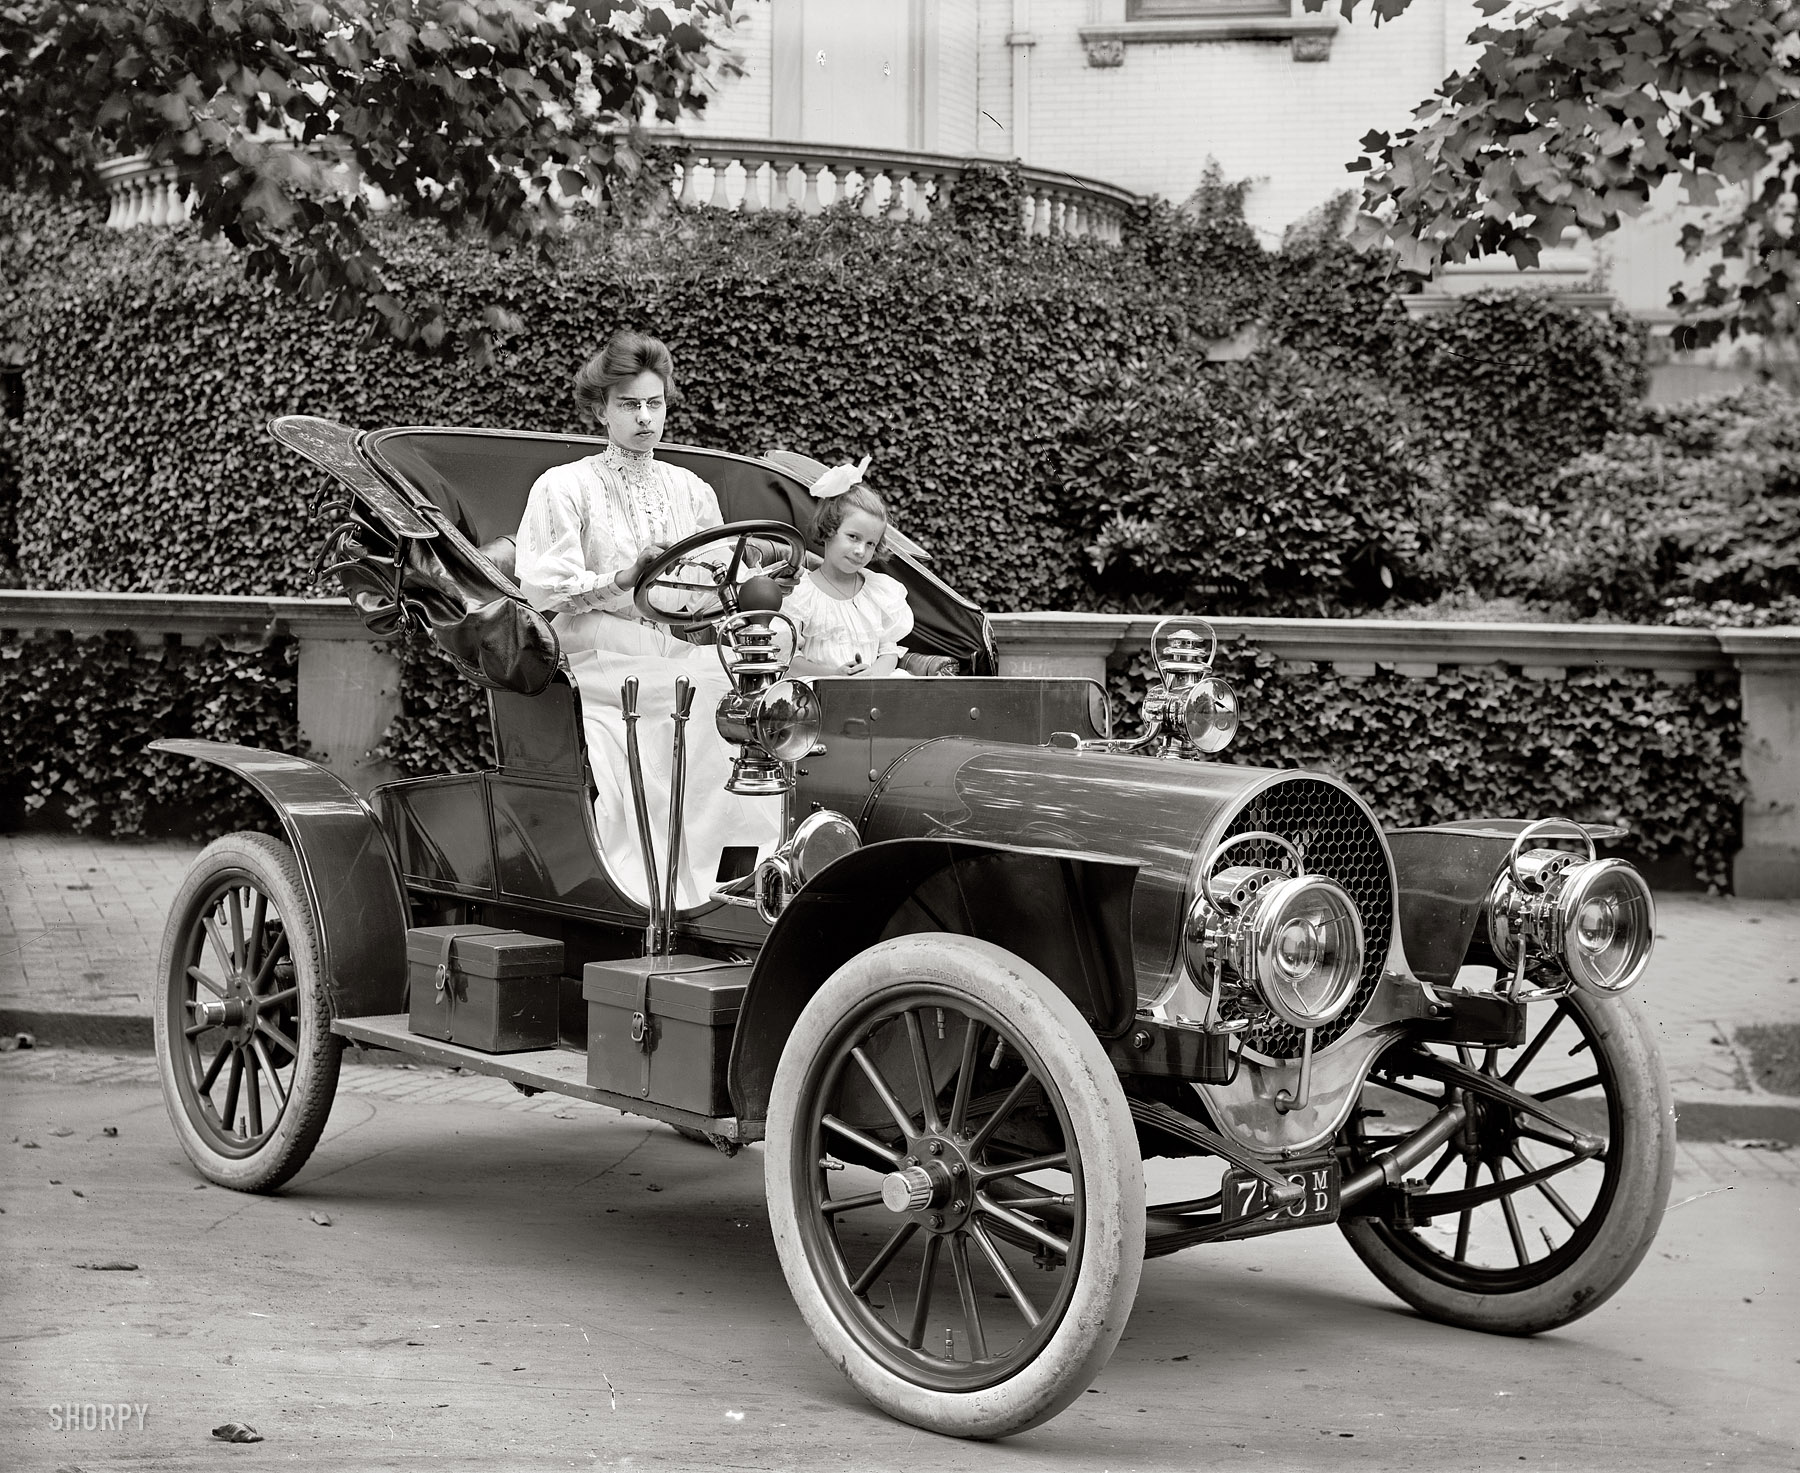 Washington, D.C., circa 1908. "Mrs. F.S. Bliven in auto." Husband Frank, who worked for Cook & Stoddard, the local Franklin automobile agency, made the newspapers for driving 35 miles with a broken steering knuckle. View full size.